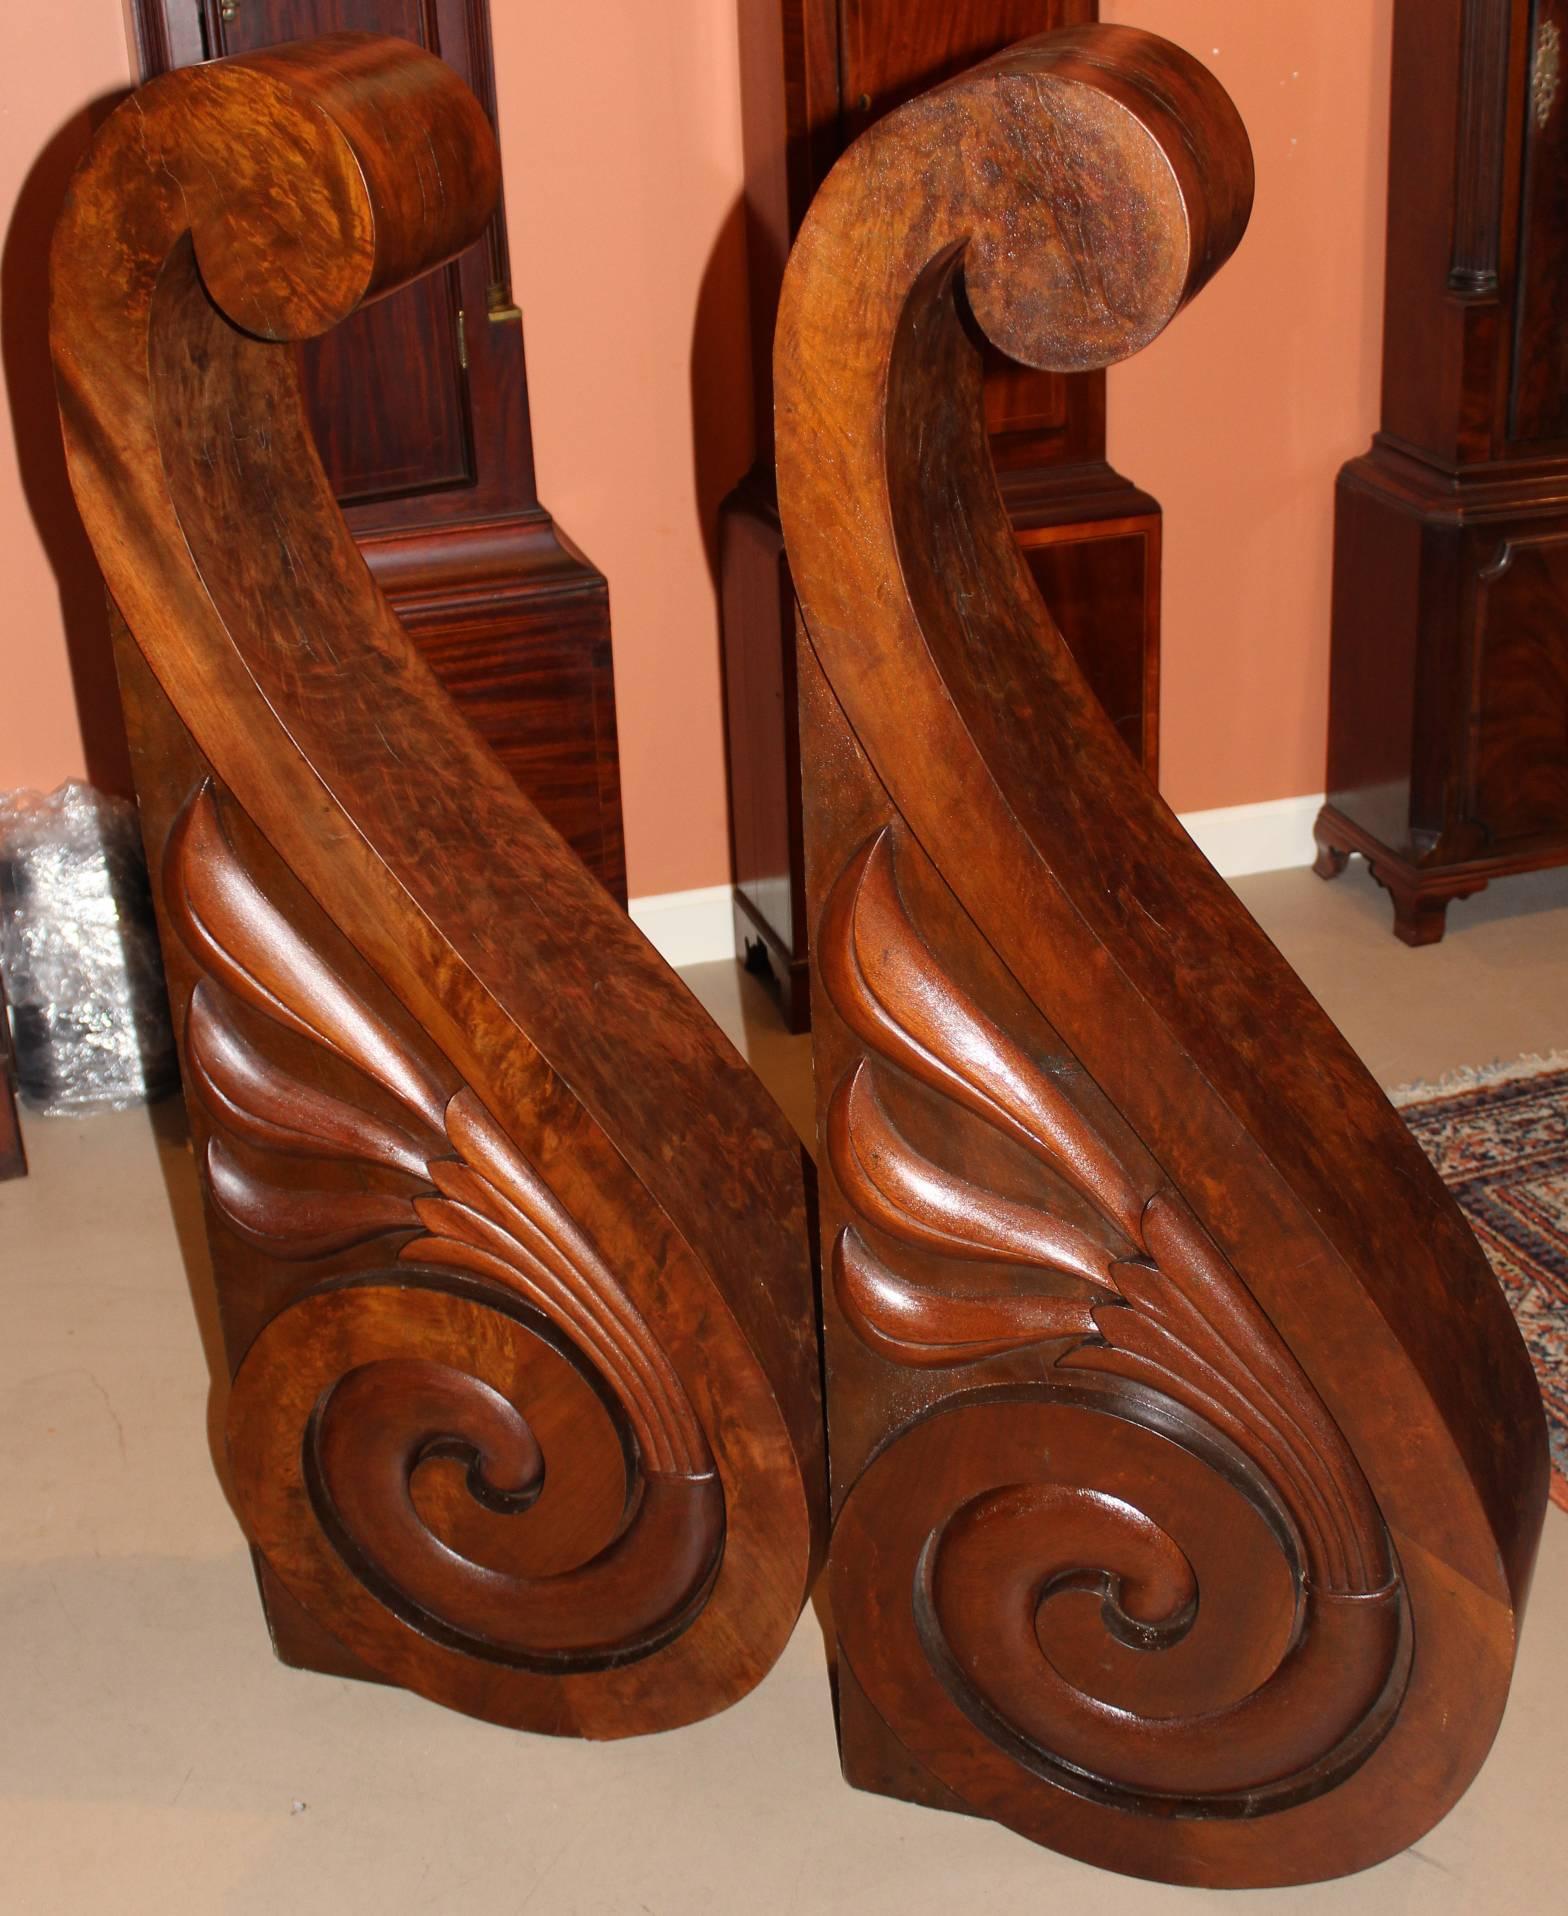 A spectacular large pair of carved wooden scroll form corbels, with mahogany and or walnut veneers, signed on the interior by the craftsman, S.D. Willis, Fitchburg, MA. Rare large size and form in a nice state of preservation.

These could also be